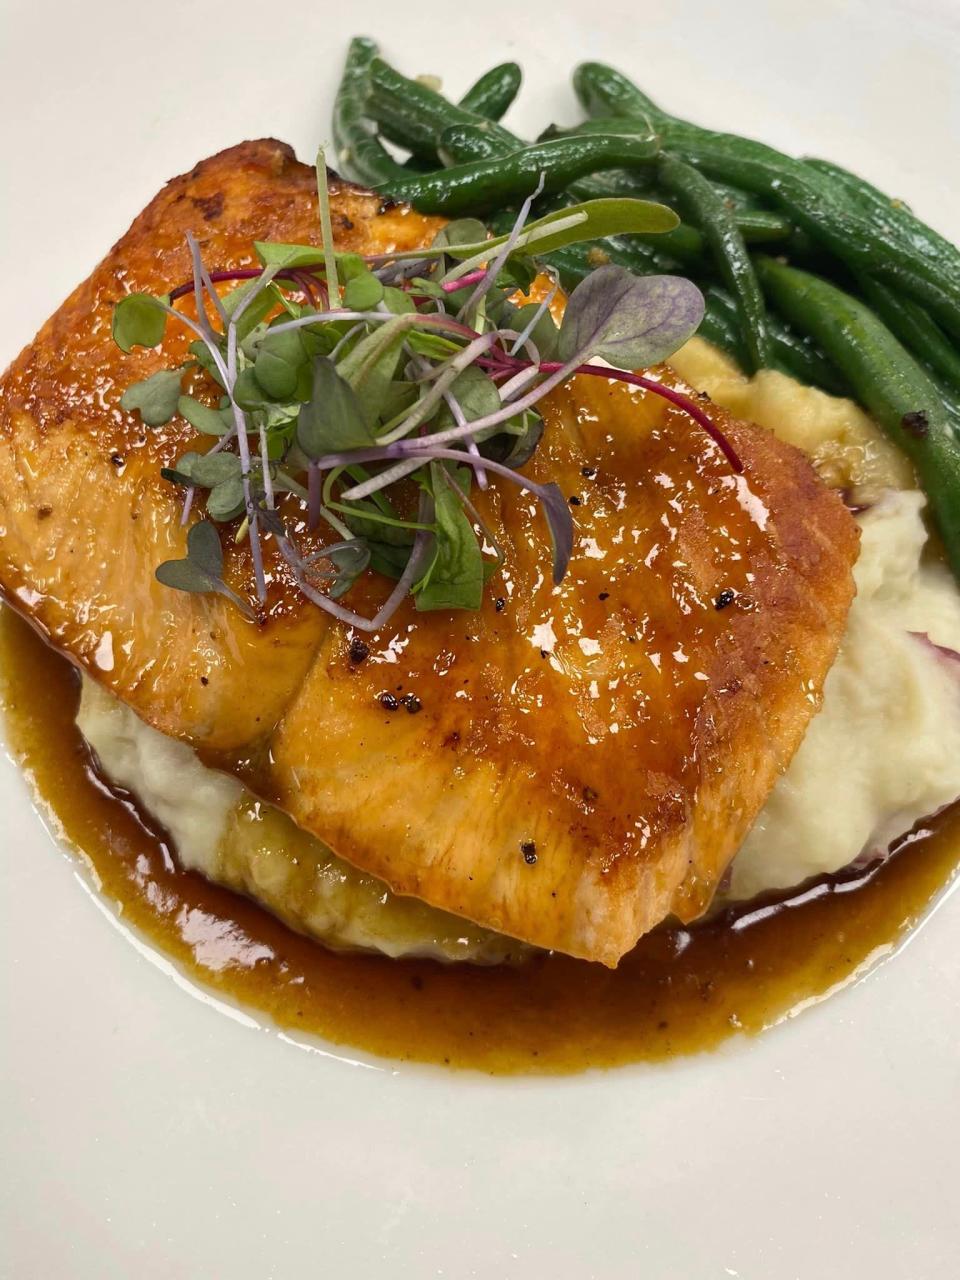 The Bourbon Salmon at The Charred Oak Tavern is back on the menu.